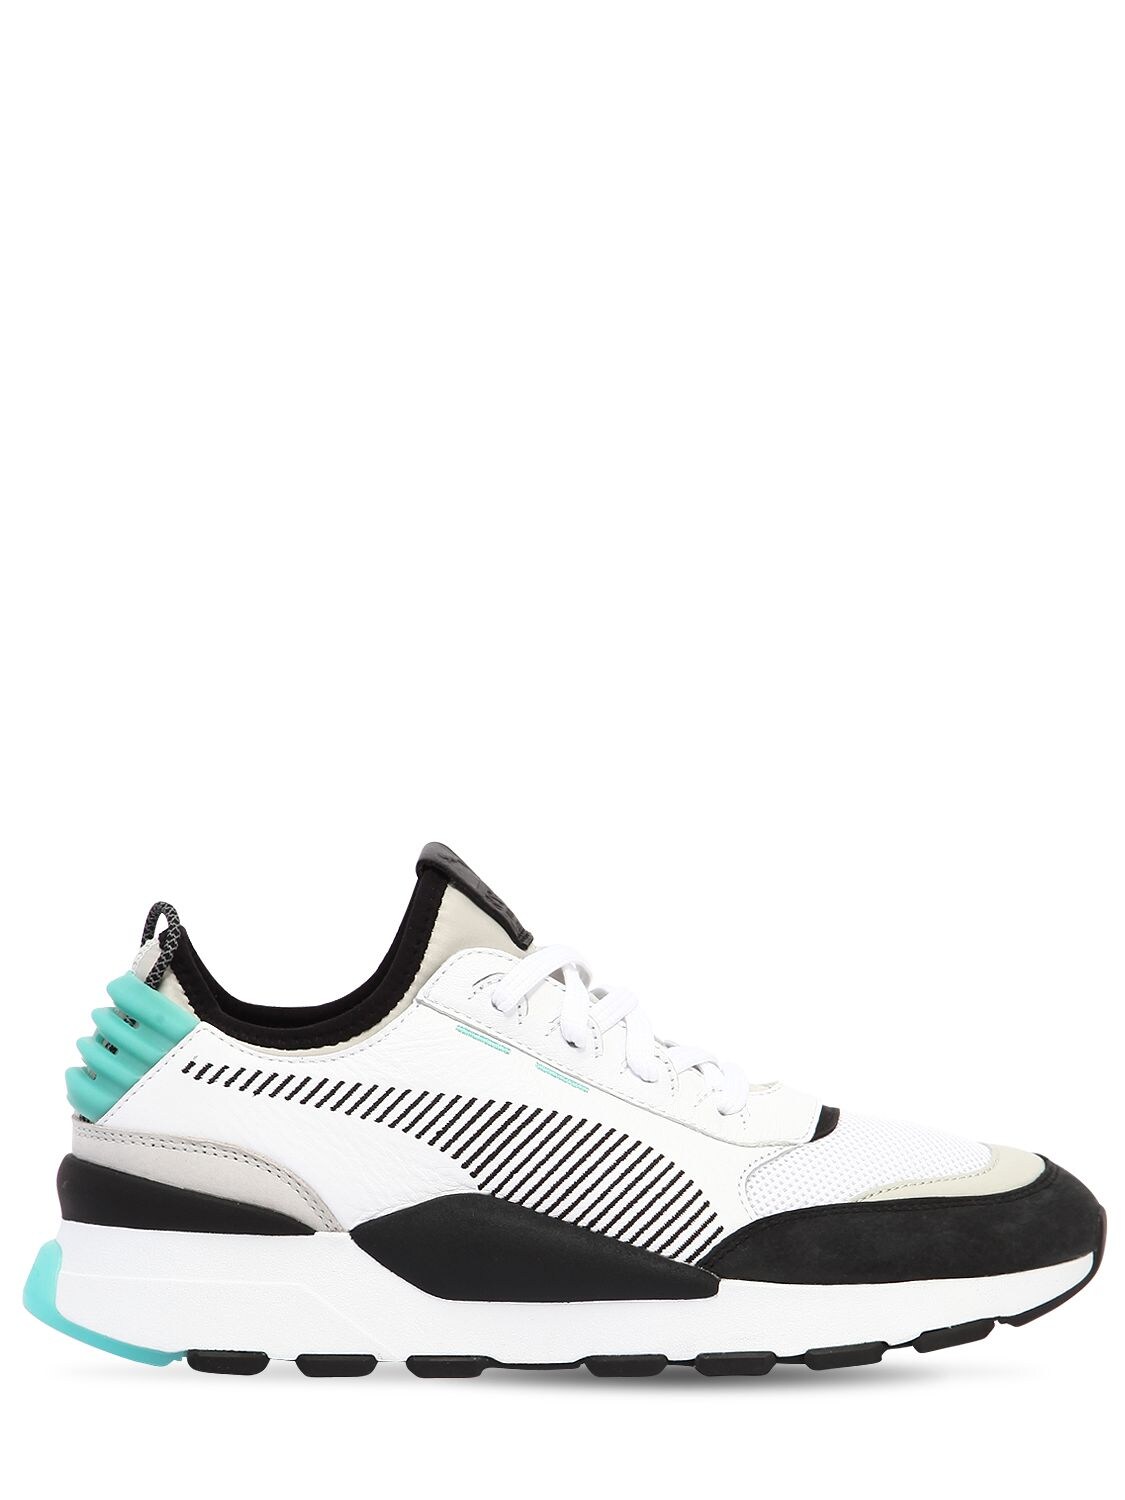 PUMA RS-0 RE-INVENTION SNEAKERS,68I0II024-MDE1